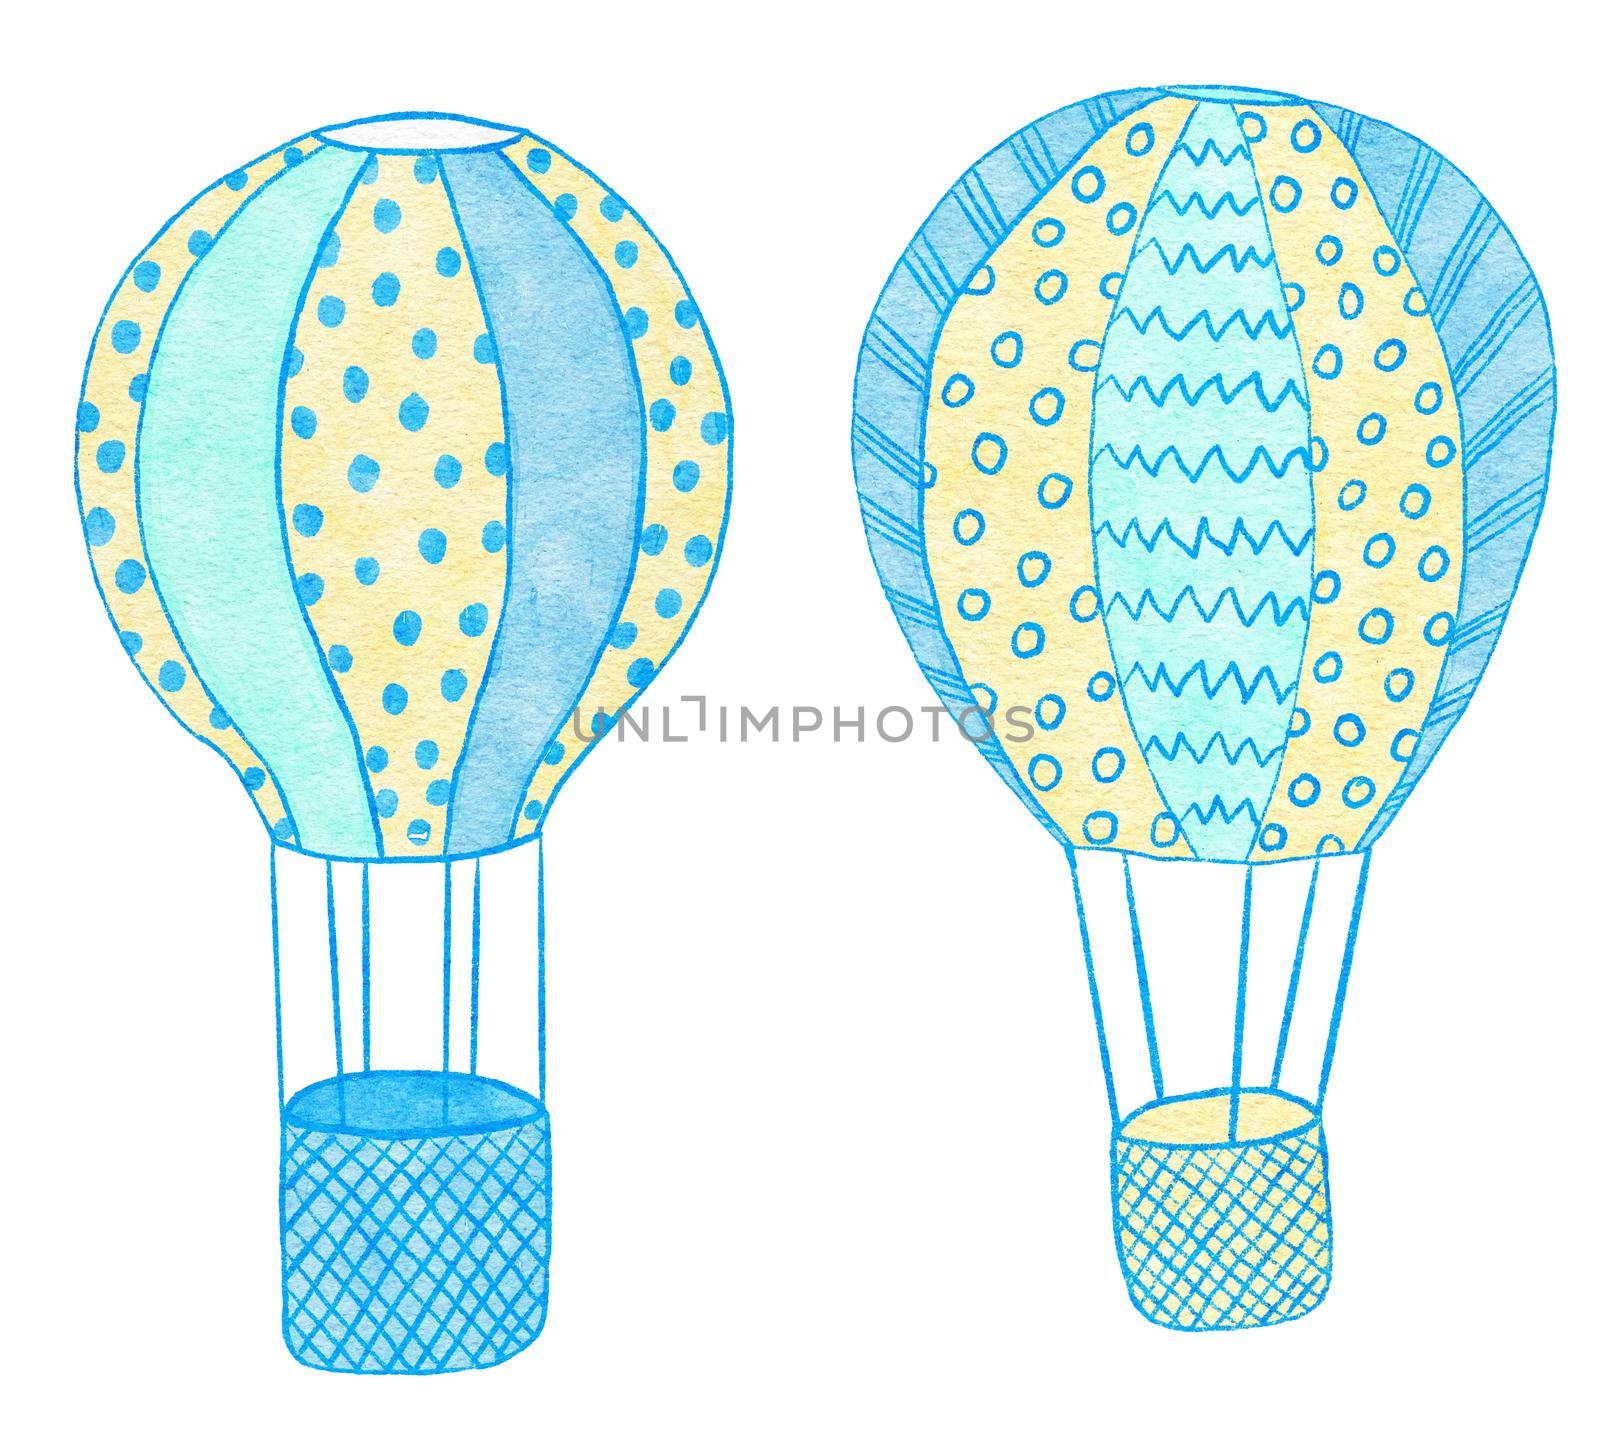 Watercolor hand drawn illustration of blue yellow cute balloons. Boy baby shower design for invitations greeting party, nursery clipart is soft pastelcolors modern minimalist print for kids children